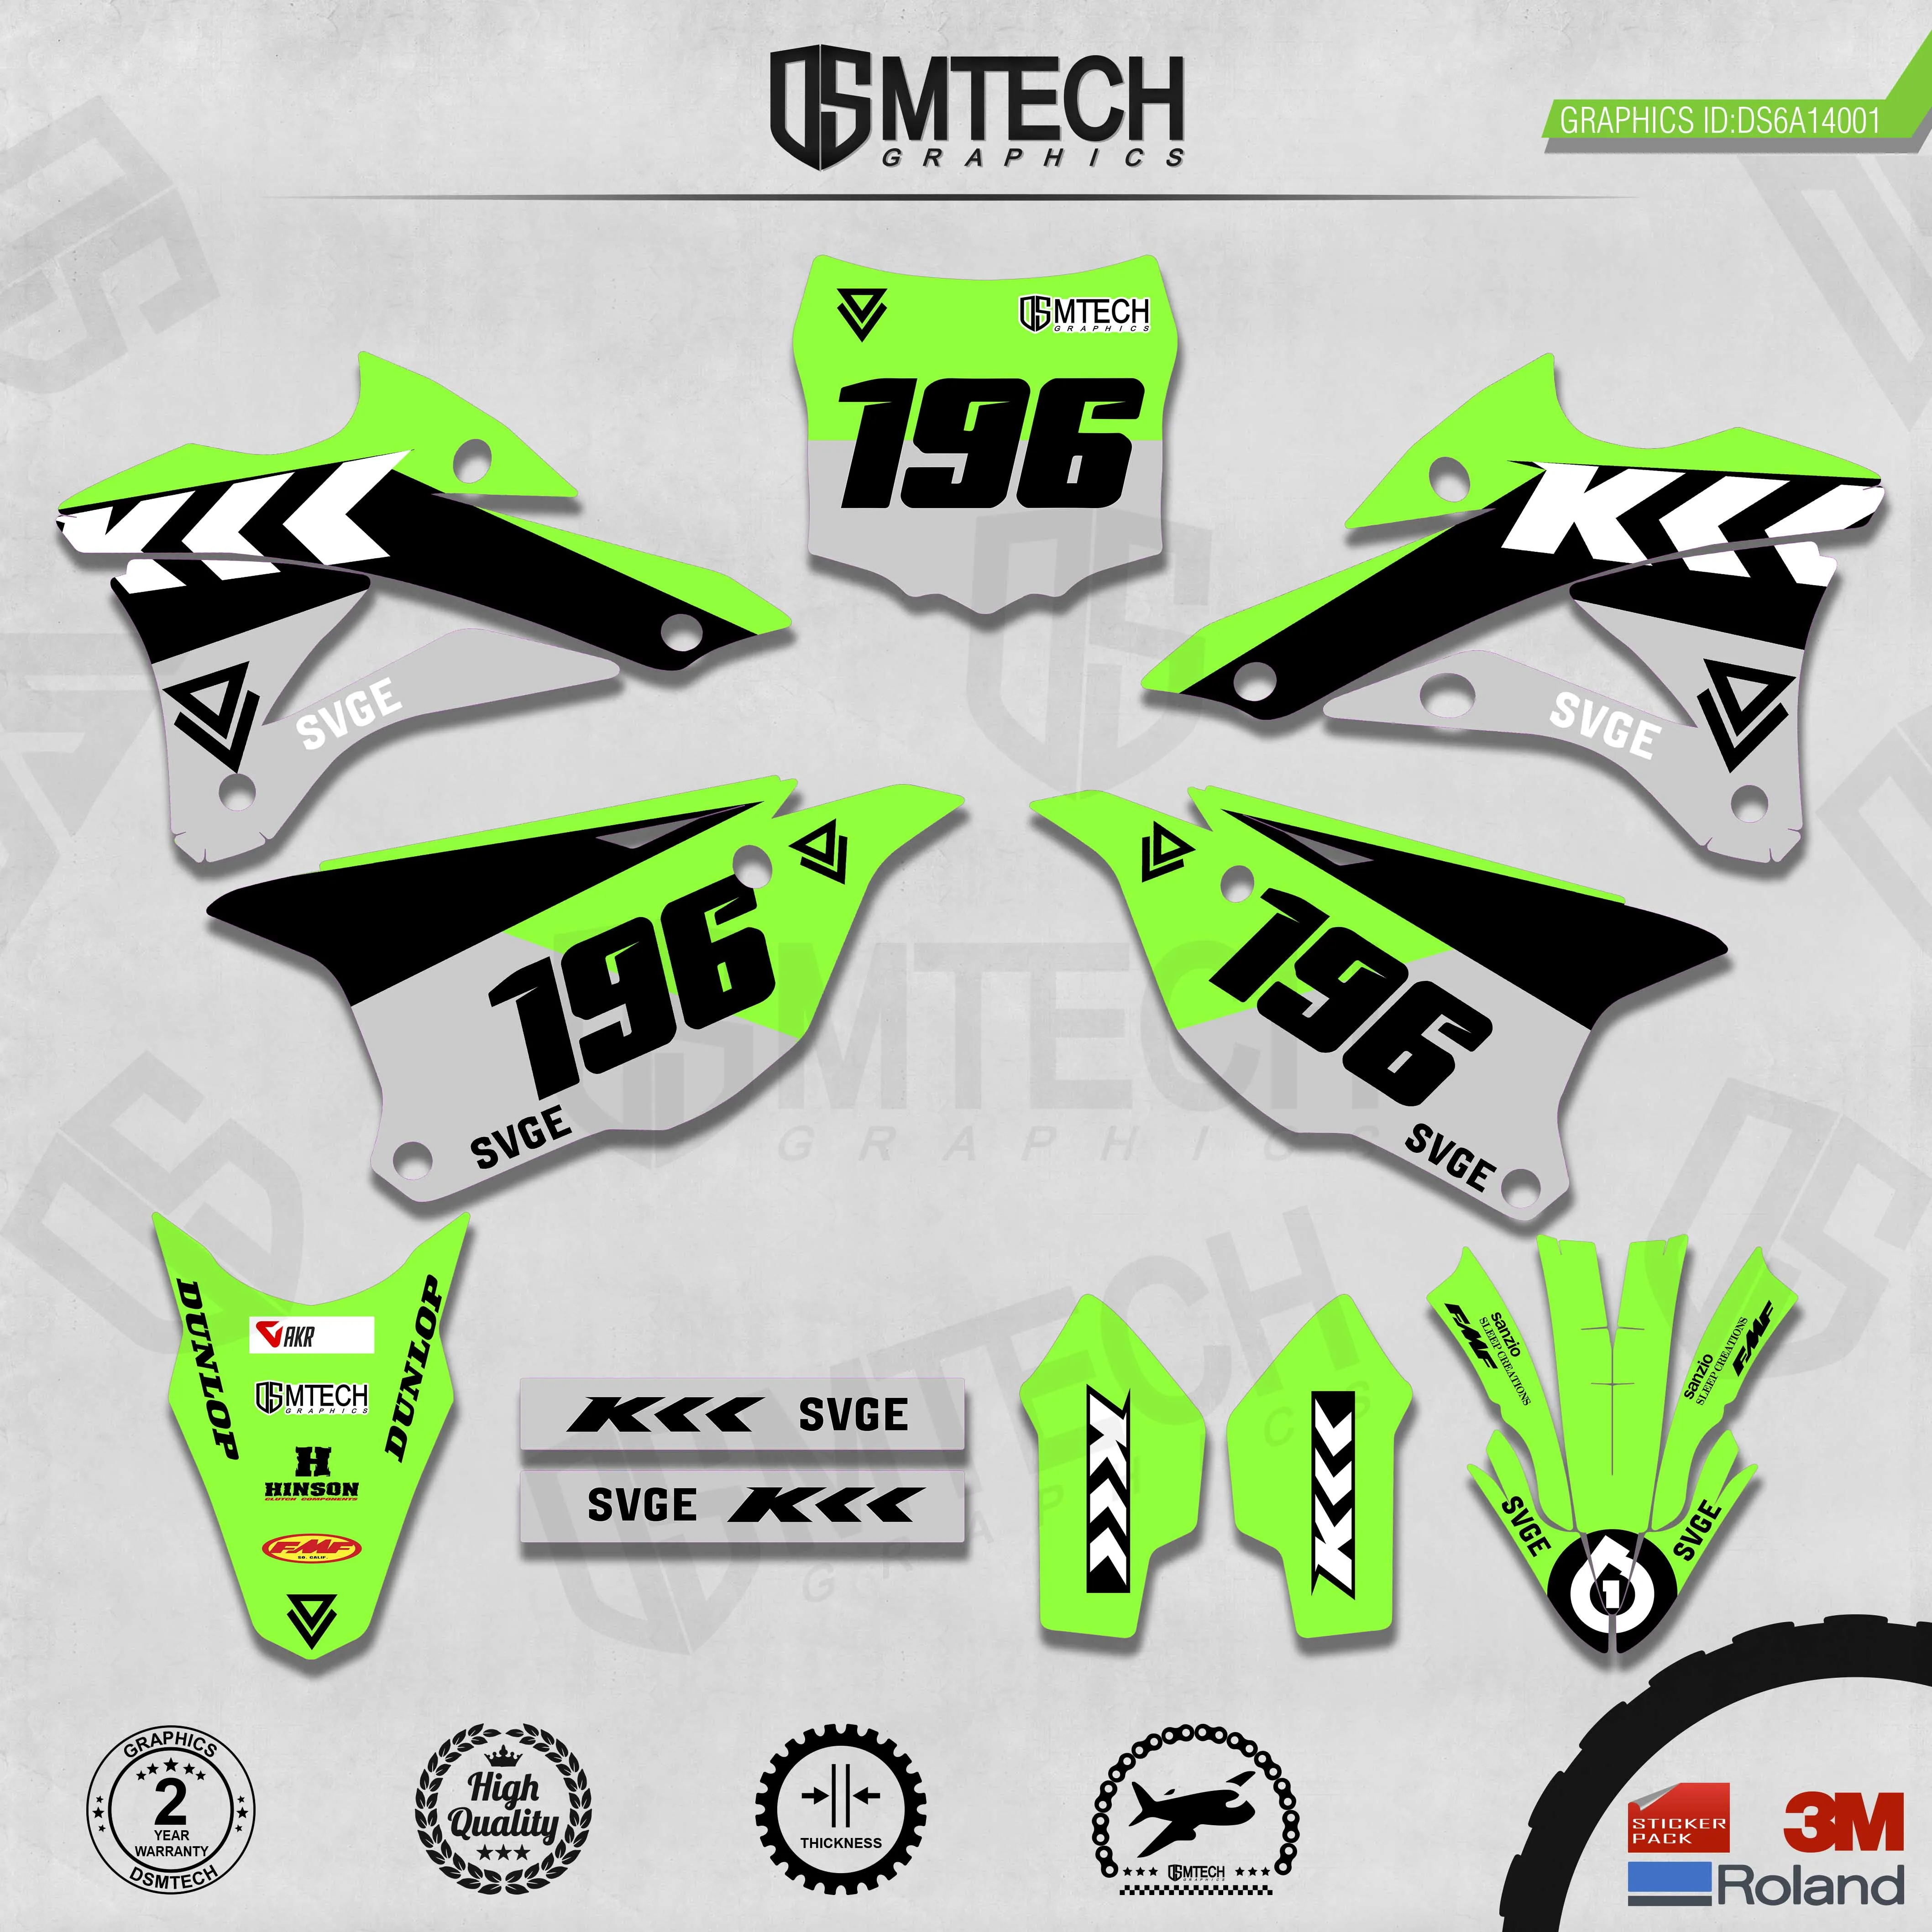 DSMTECH Customized Team Graphics Backgrounds Decals 3M Custom Stickers For KAWASAKI  2014 2015 2016 2017 2018 2019 KX85-100 001